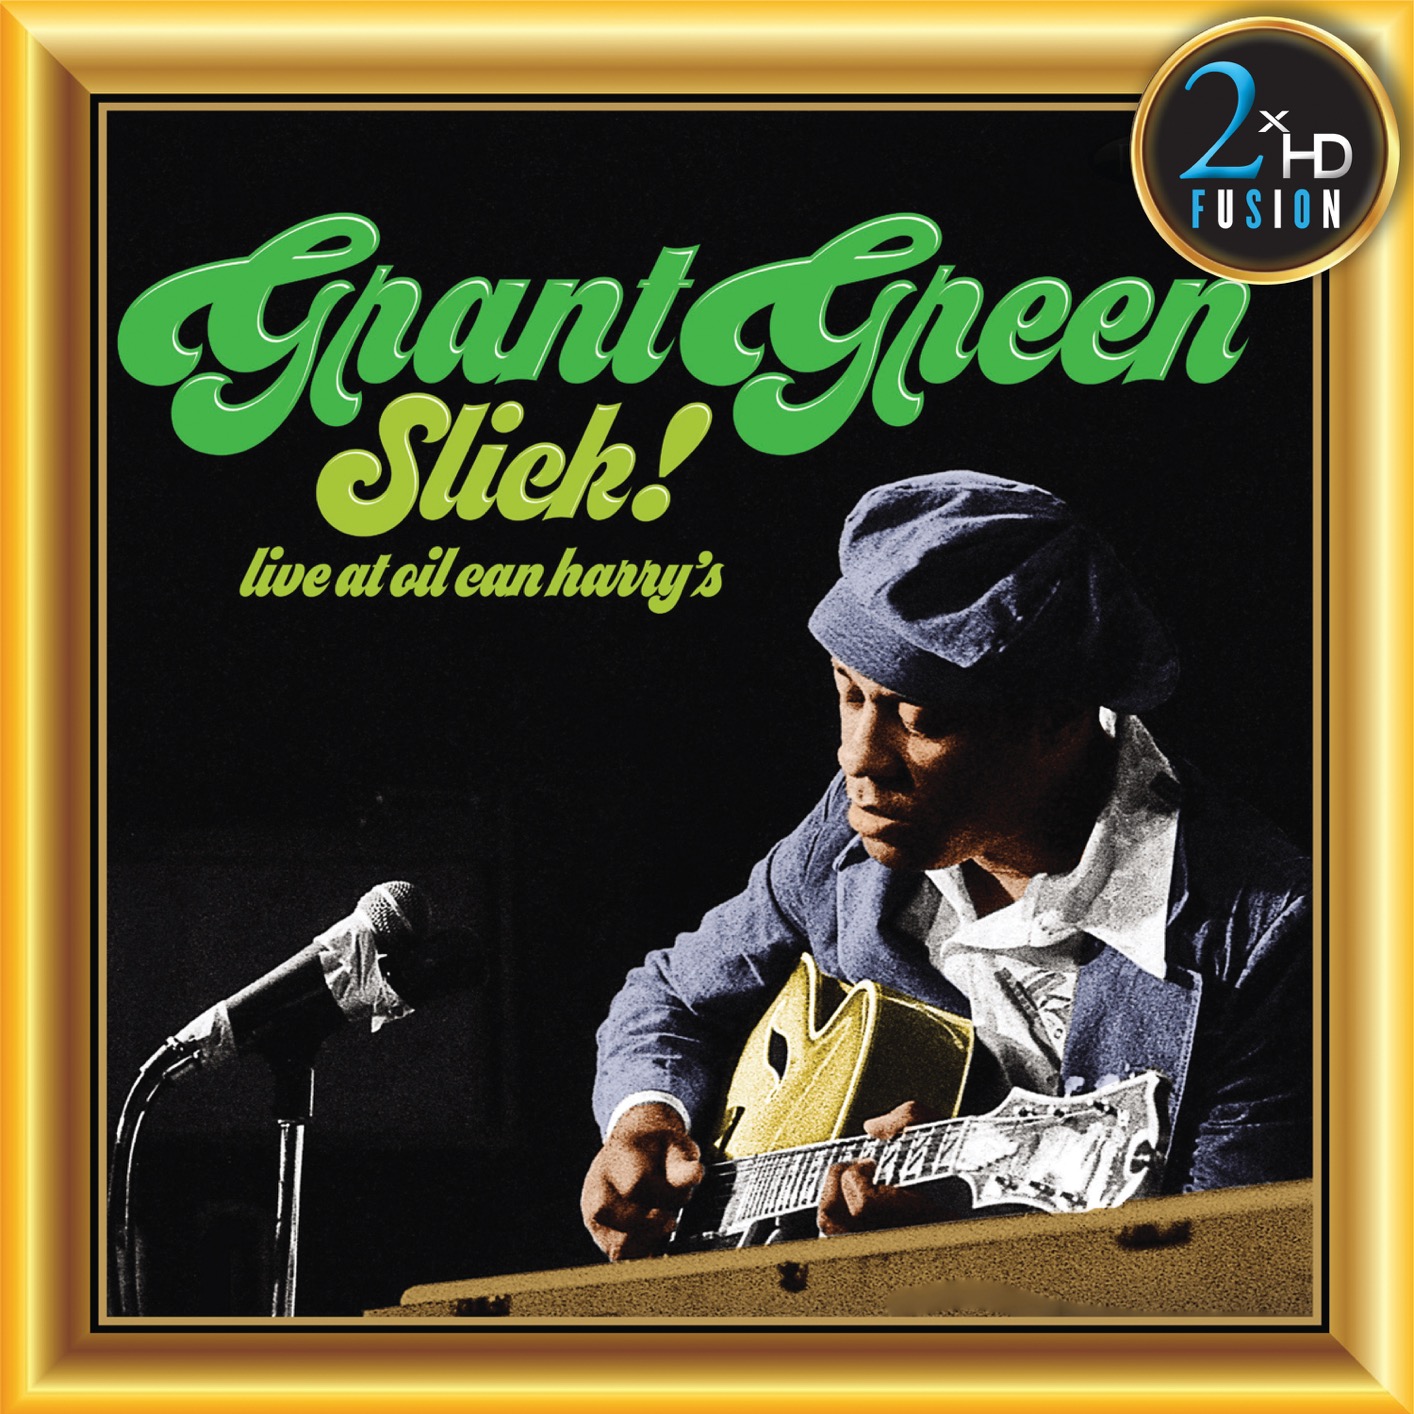 Grant Green – Grant Green, Slick! Live at Oil Can Harry’s (Remastered) (2019) [FLAC 24bit/192kHz]